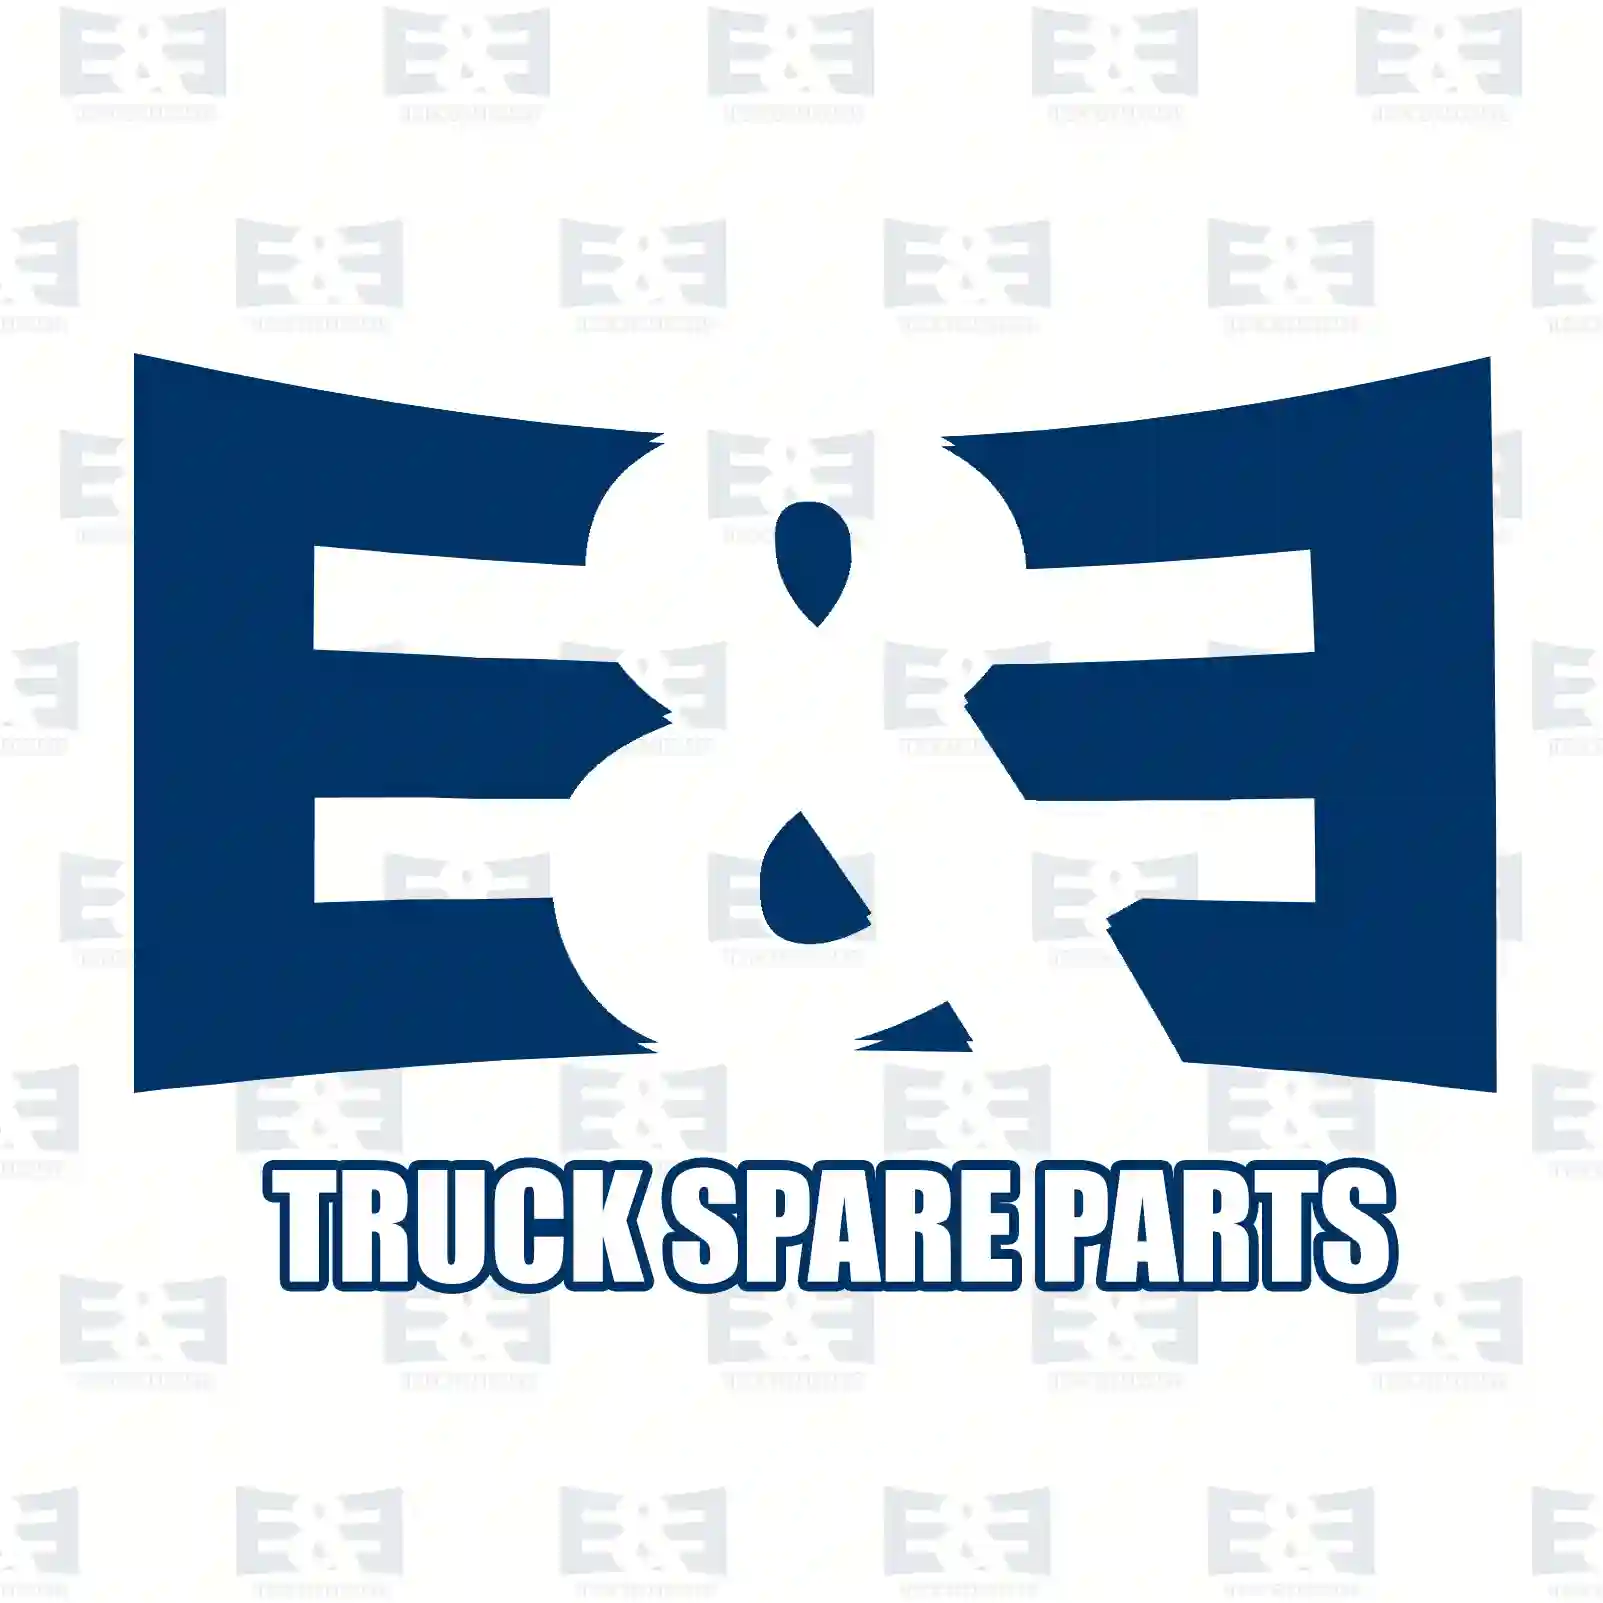 Multiribbed belt, 2E2203758, 1099892, 1129181, YC1E-6C301-AB, YC1E-6C301-CB, ERR6896 ||  2E2203758 E&E Truck Spare Parts | Truck Spare Parts, Auotomotive Spare Parts Multiribbed belt, 2E2203758, 1099892, 1129181, YC1E-6C301-AB, YC1E-6C301-CB, ERR6896 ||  2E2203758 E&E Truck Spare Parts | Truck Spare Parts, Auotomotive Spare Parts